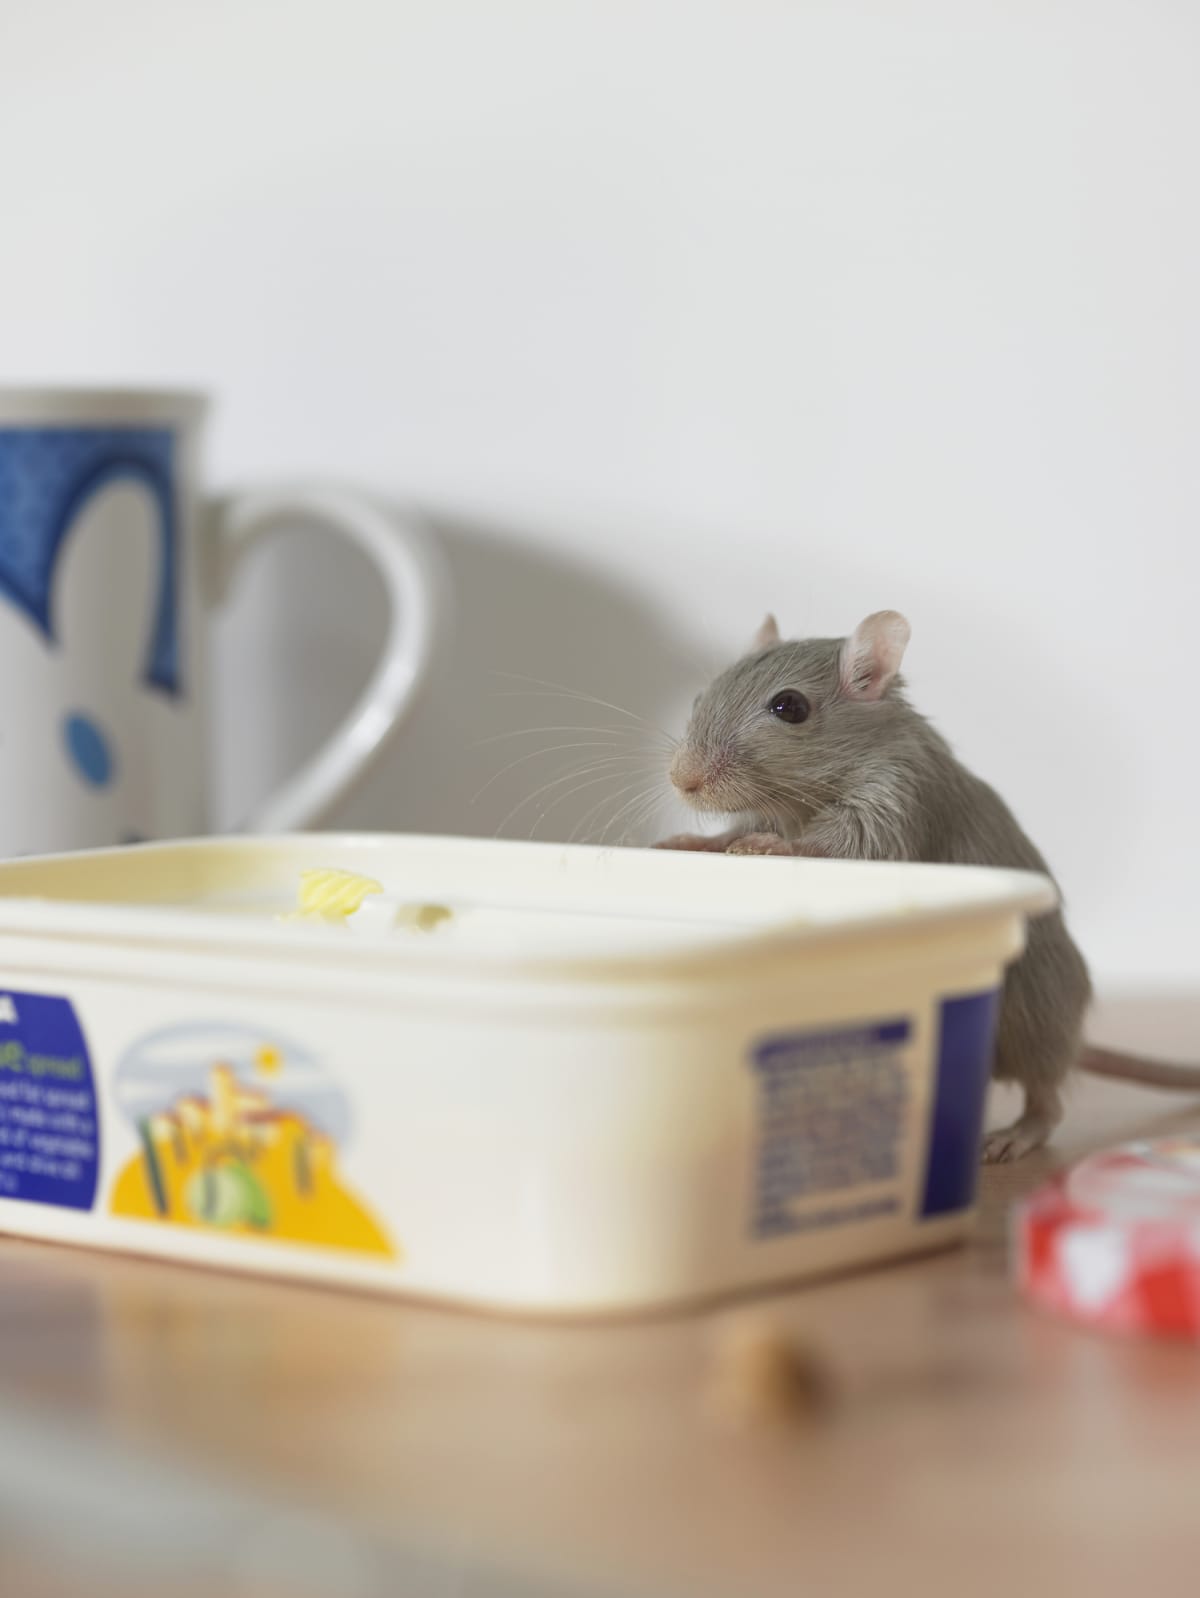 A mouse peeks into the margarine tub